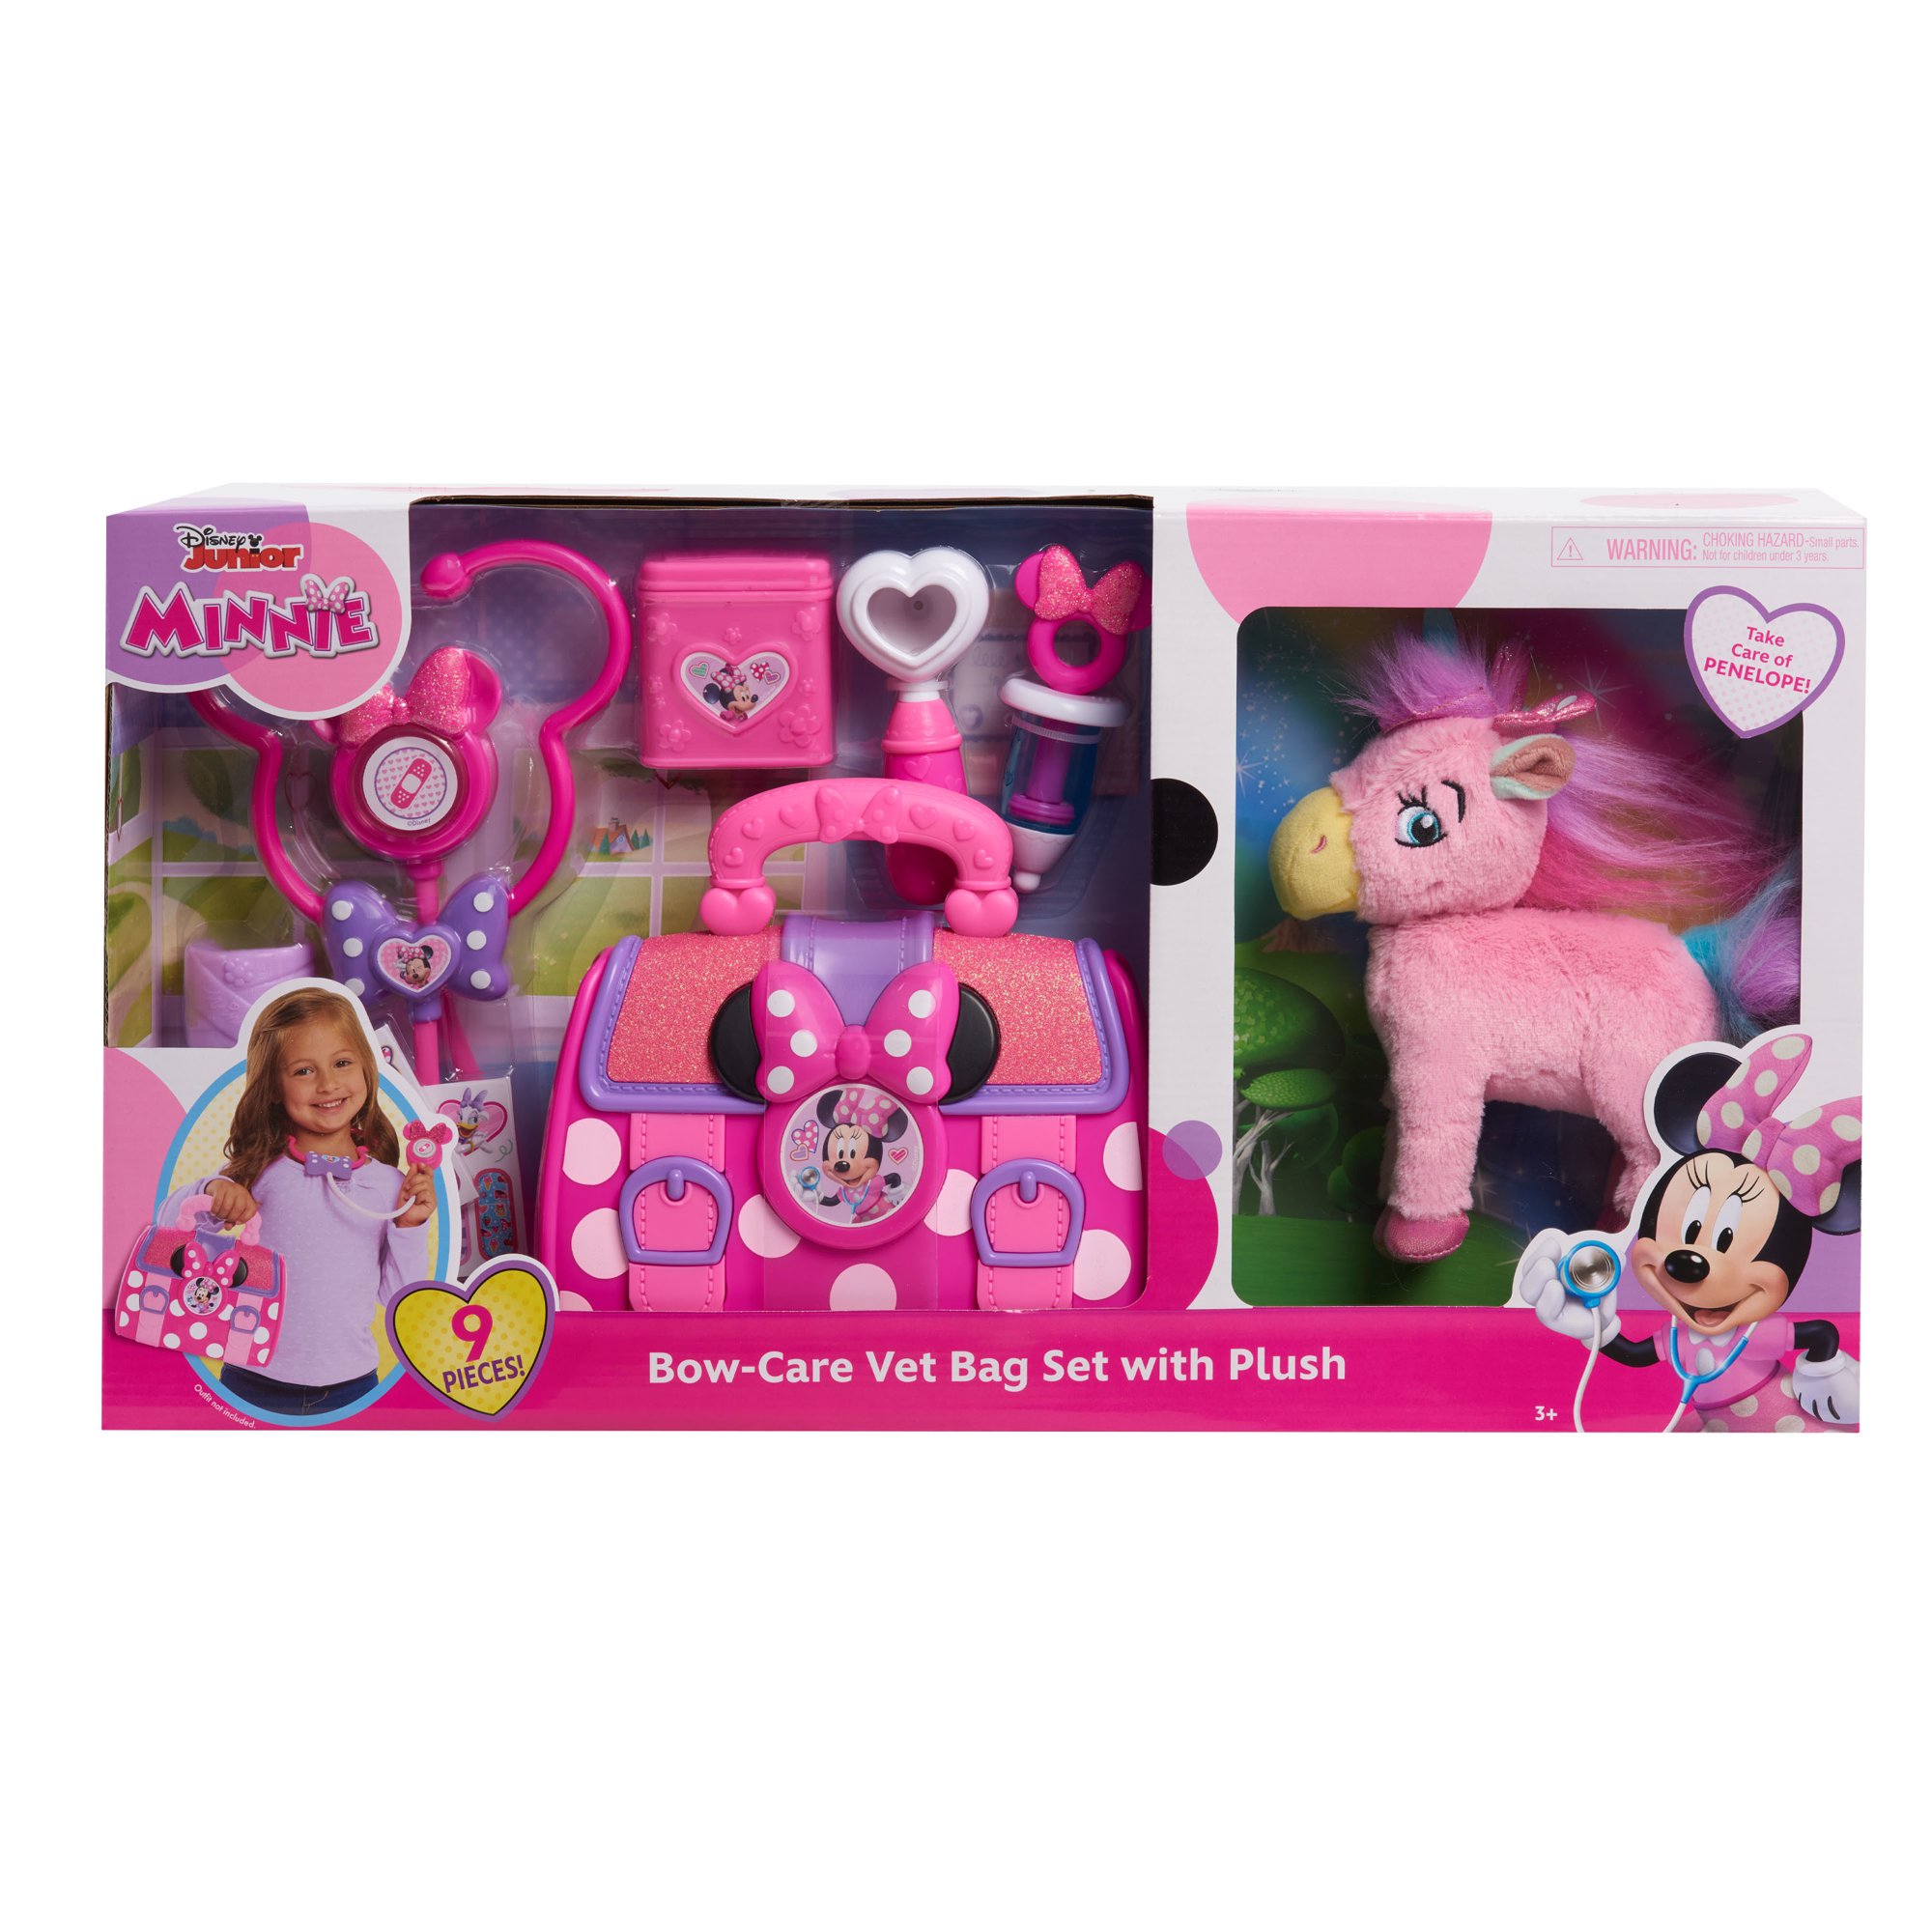 Minnie Mouse Just Play Disney Minnie Mouse Bow-Care 9 pc Vet Bag Set with Unicorn Plush Animal